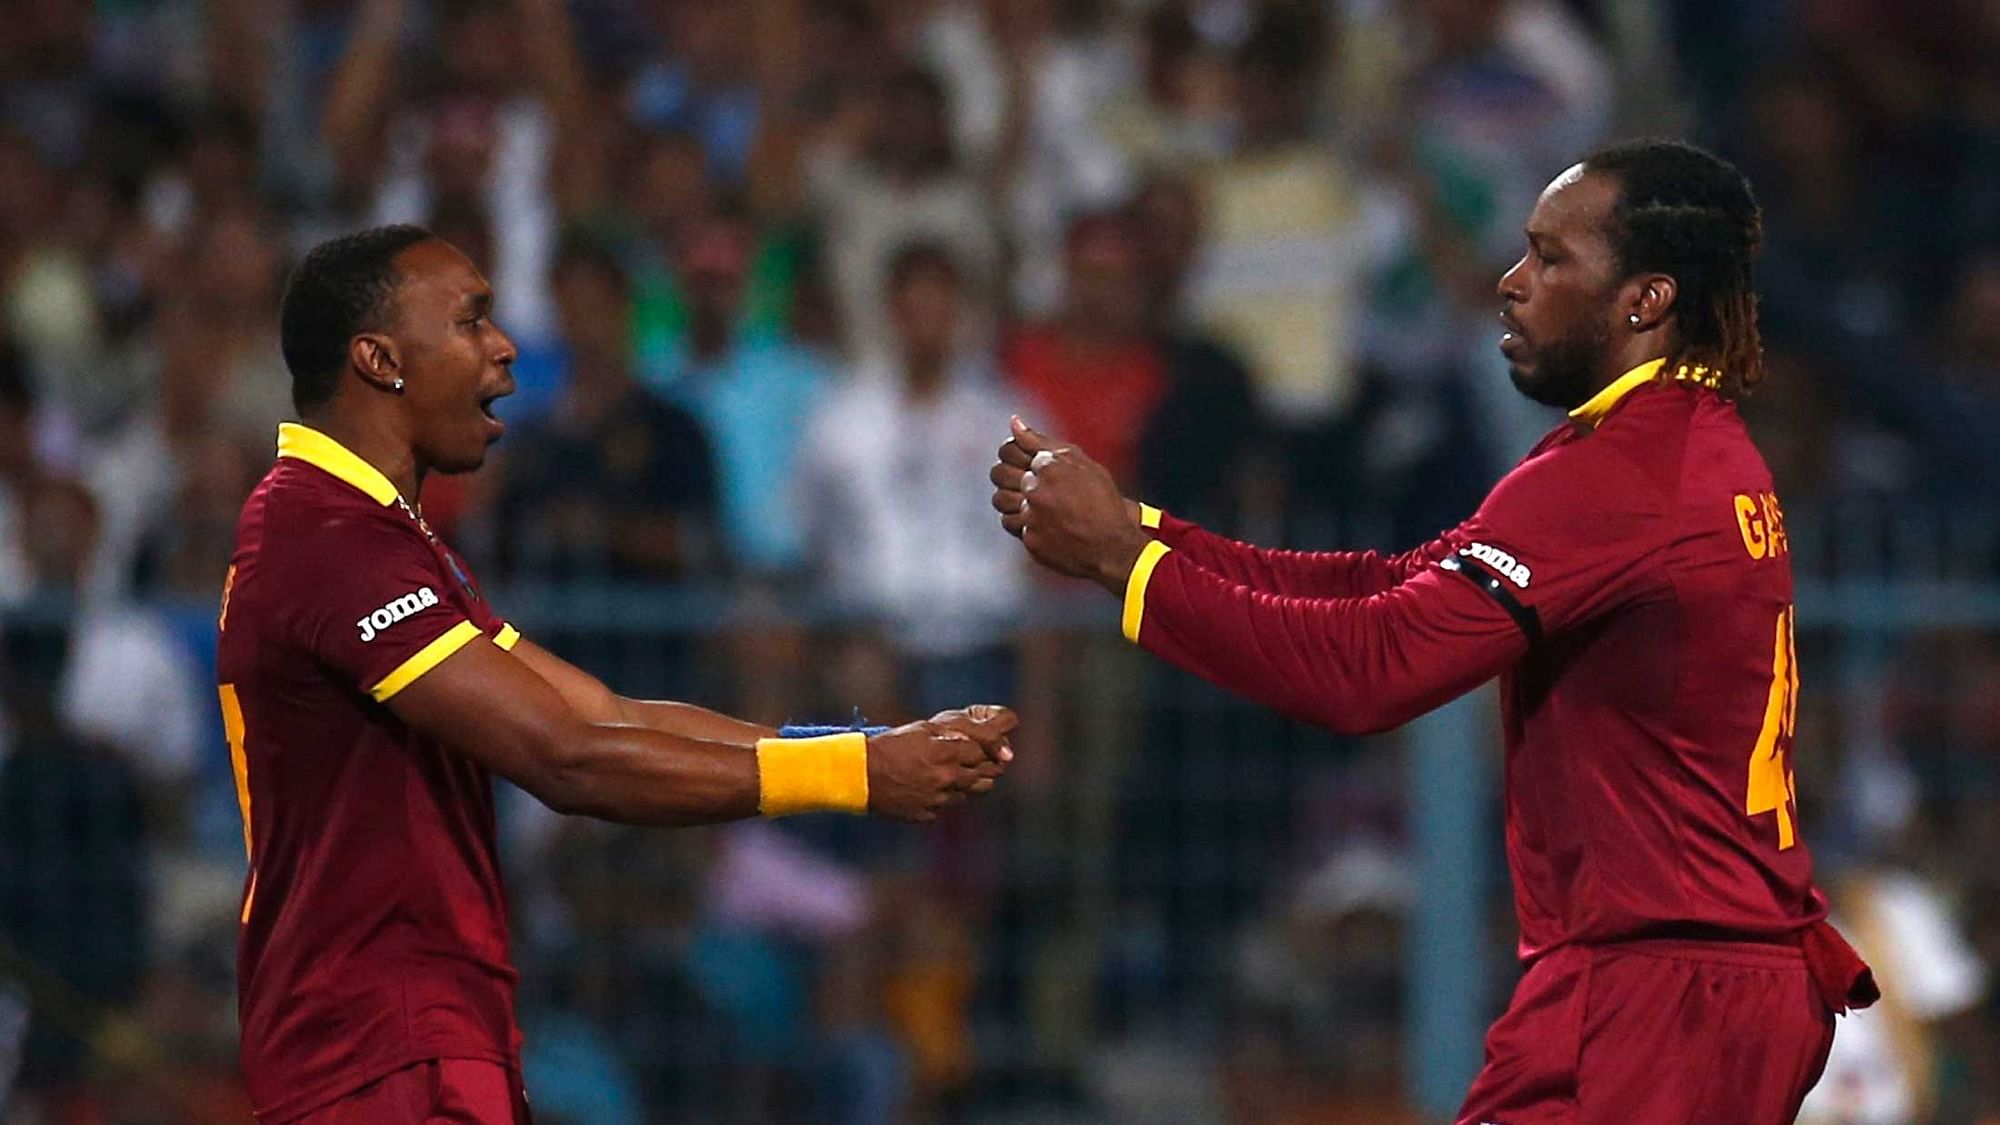 Dwayne Bravo and Chris Gayle celebrate a wicket during the ICC World T20 in 2016. (Photo: Reuters)